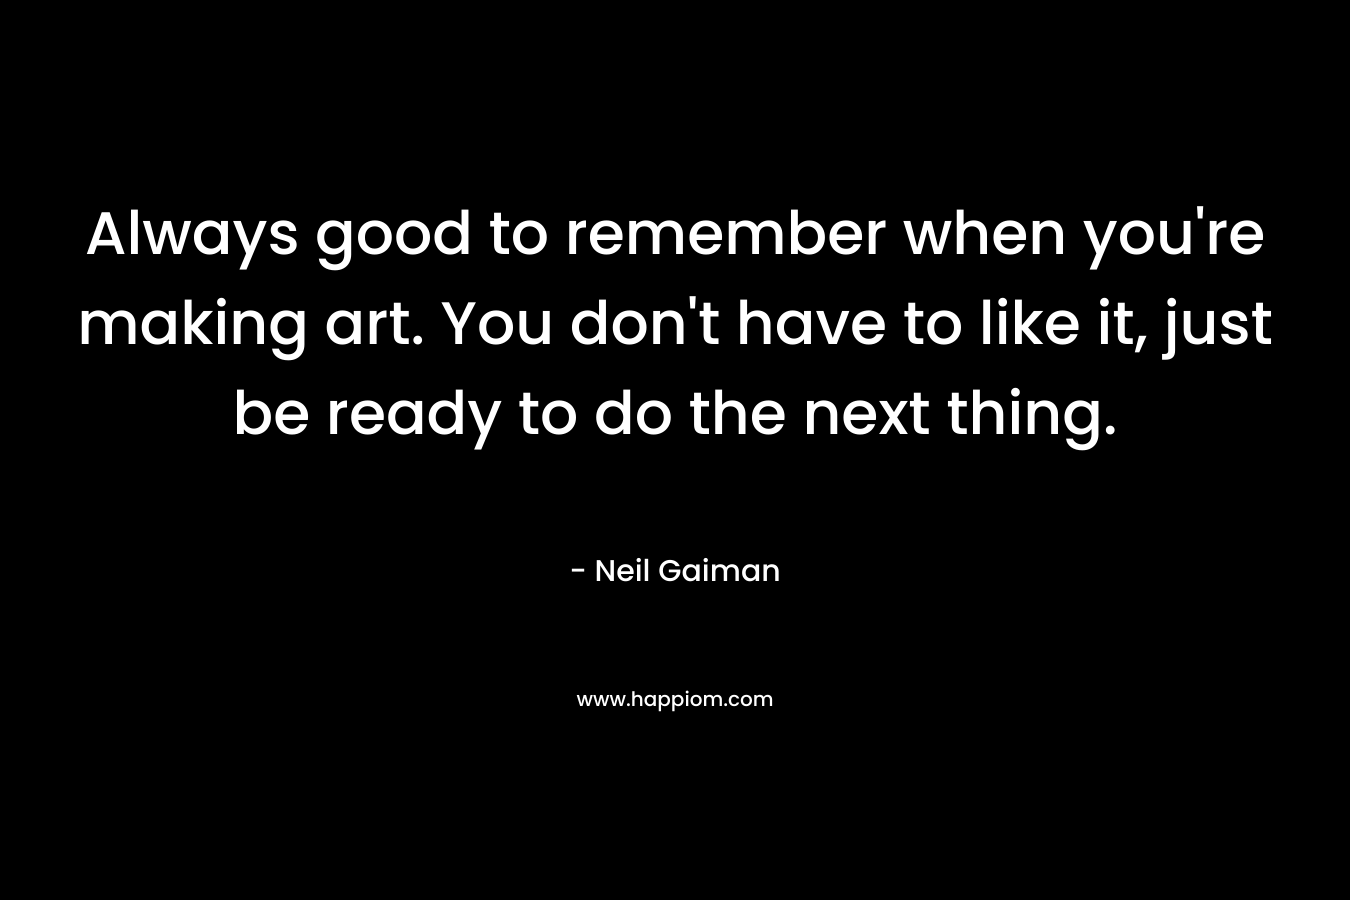 Always good to remember when you're making art. You don't have to like it, just be ready to do the next thing.